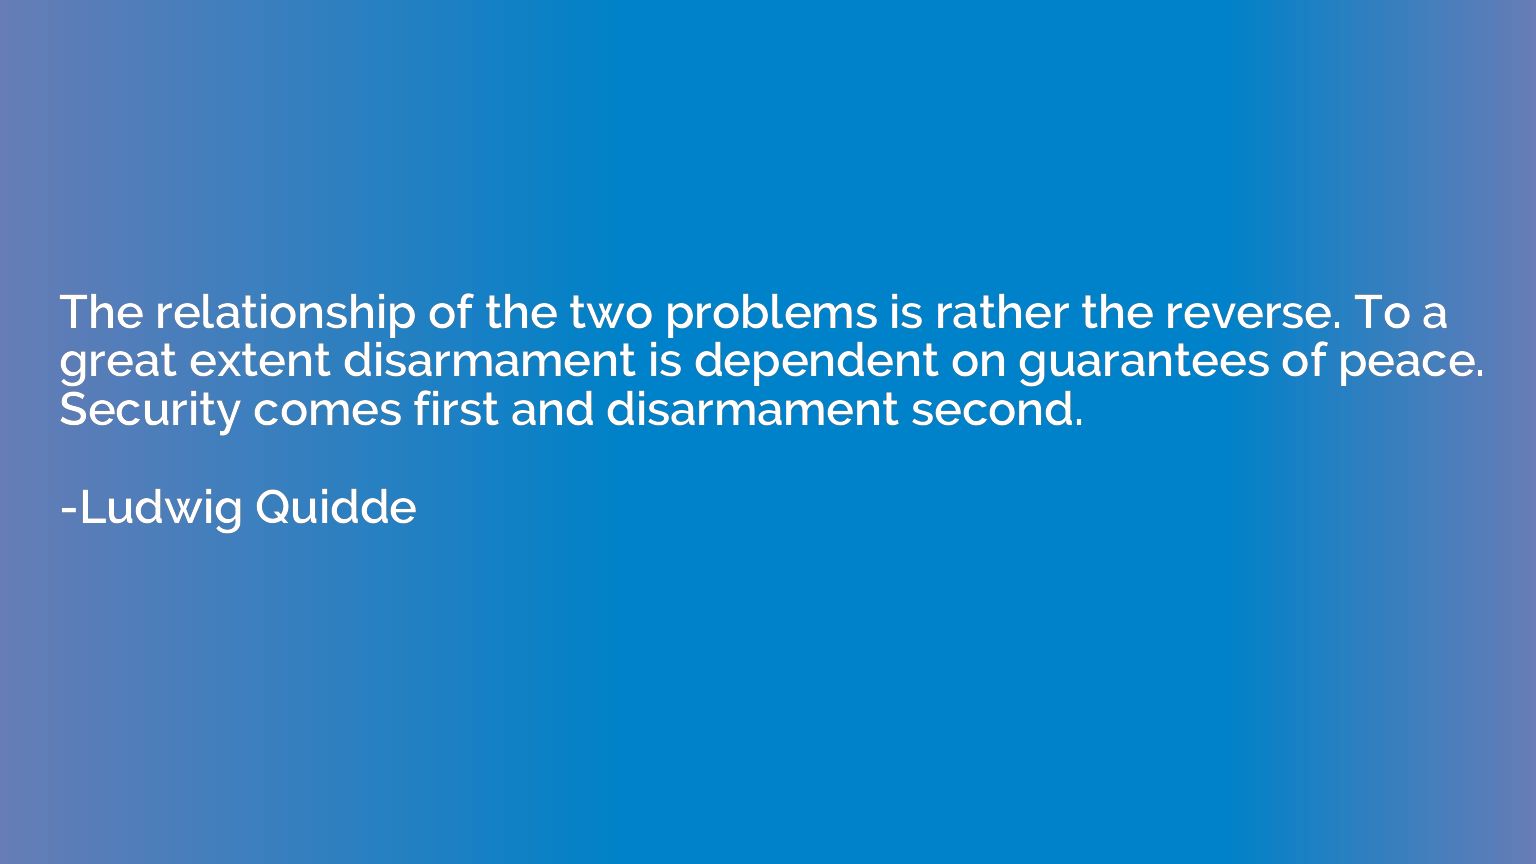 The relationship of the two problems is rather the reverse. 